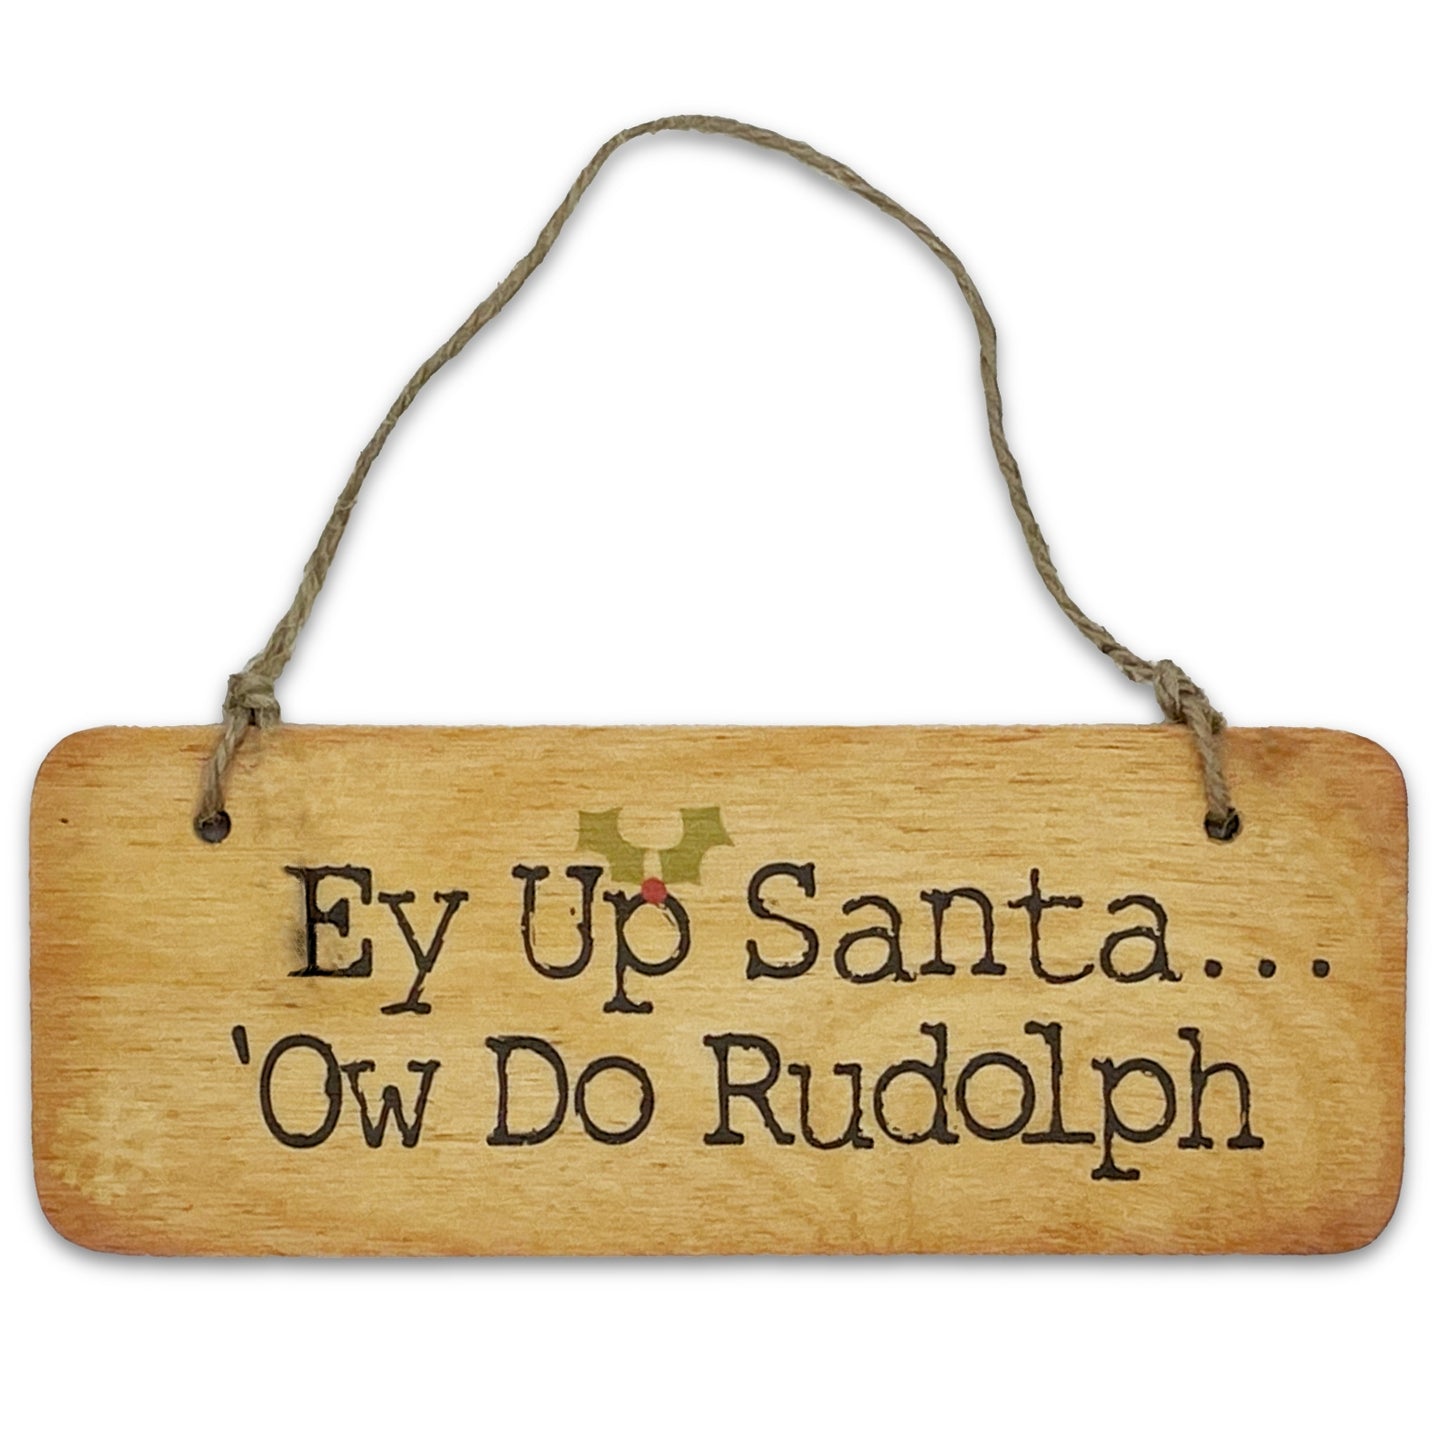 Ey Up Santa 'Ow Do Rudolph Rustic Wooden Sign - The Great Yorkshire Shop